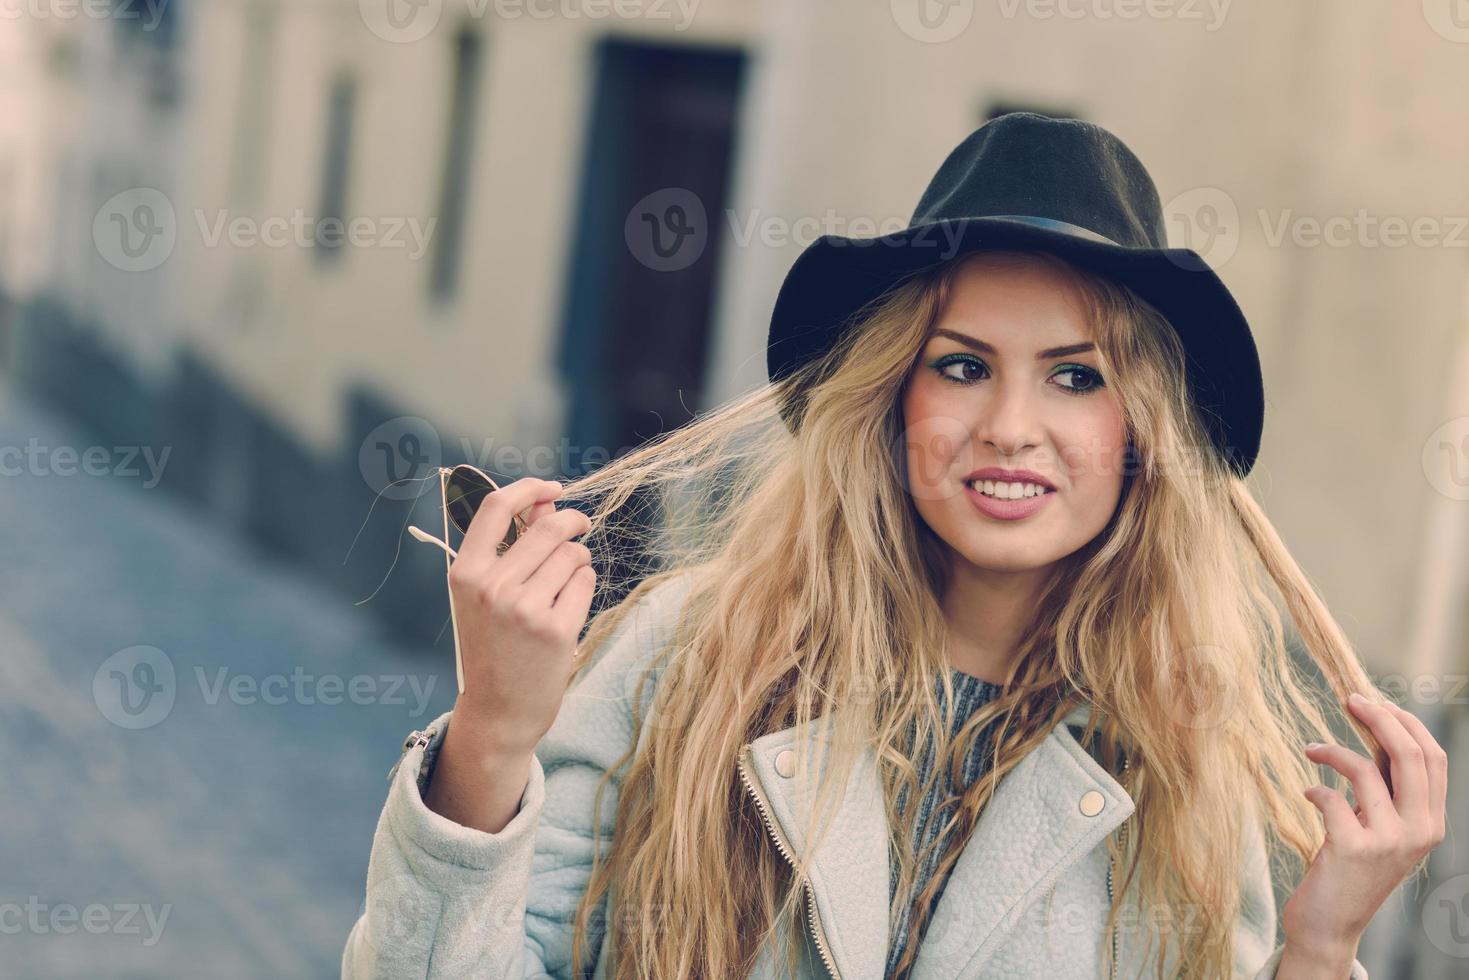 Woman looking with her curly blonde hair in urban background photo